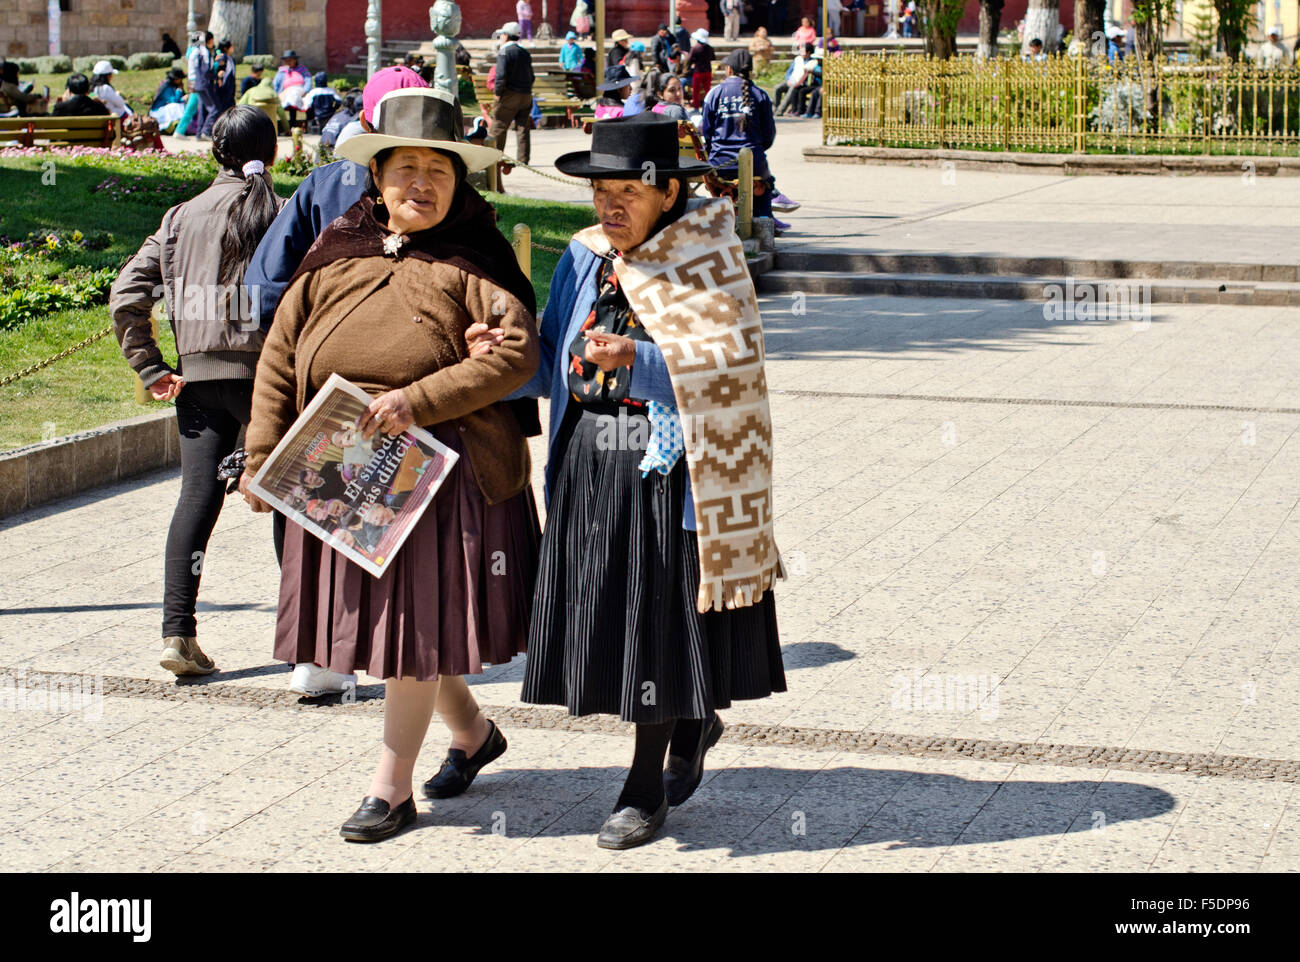 Huancavelica street ,Andes, Peru Stock Photo